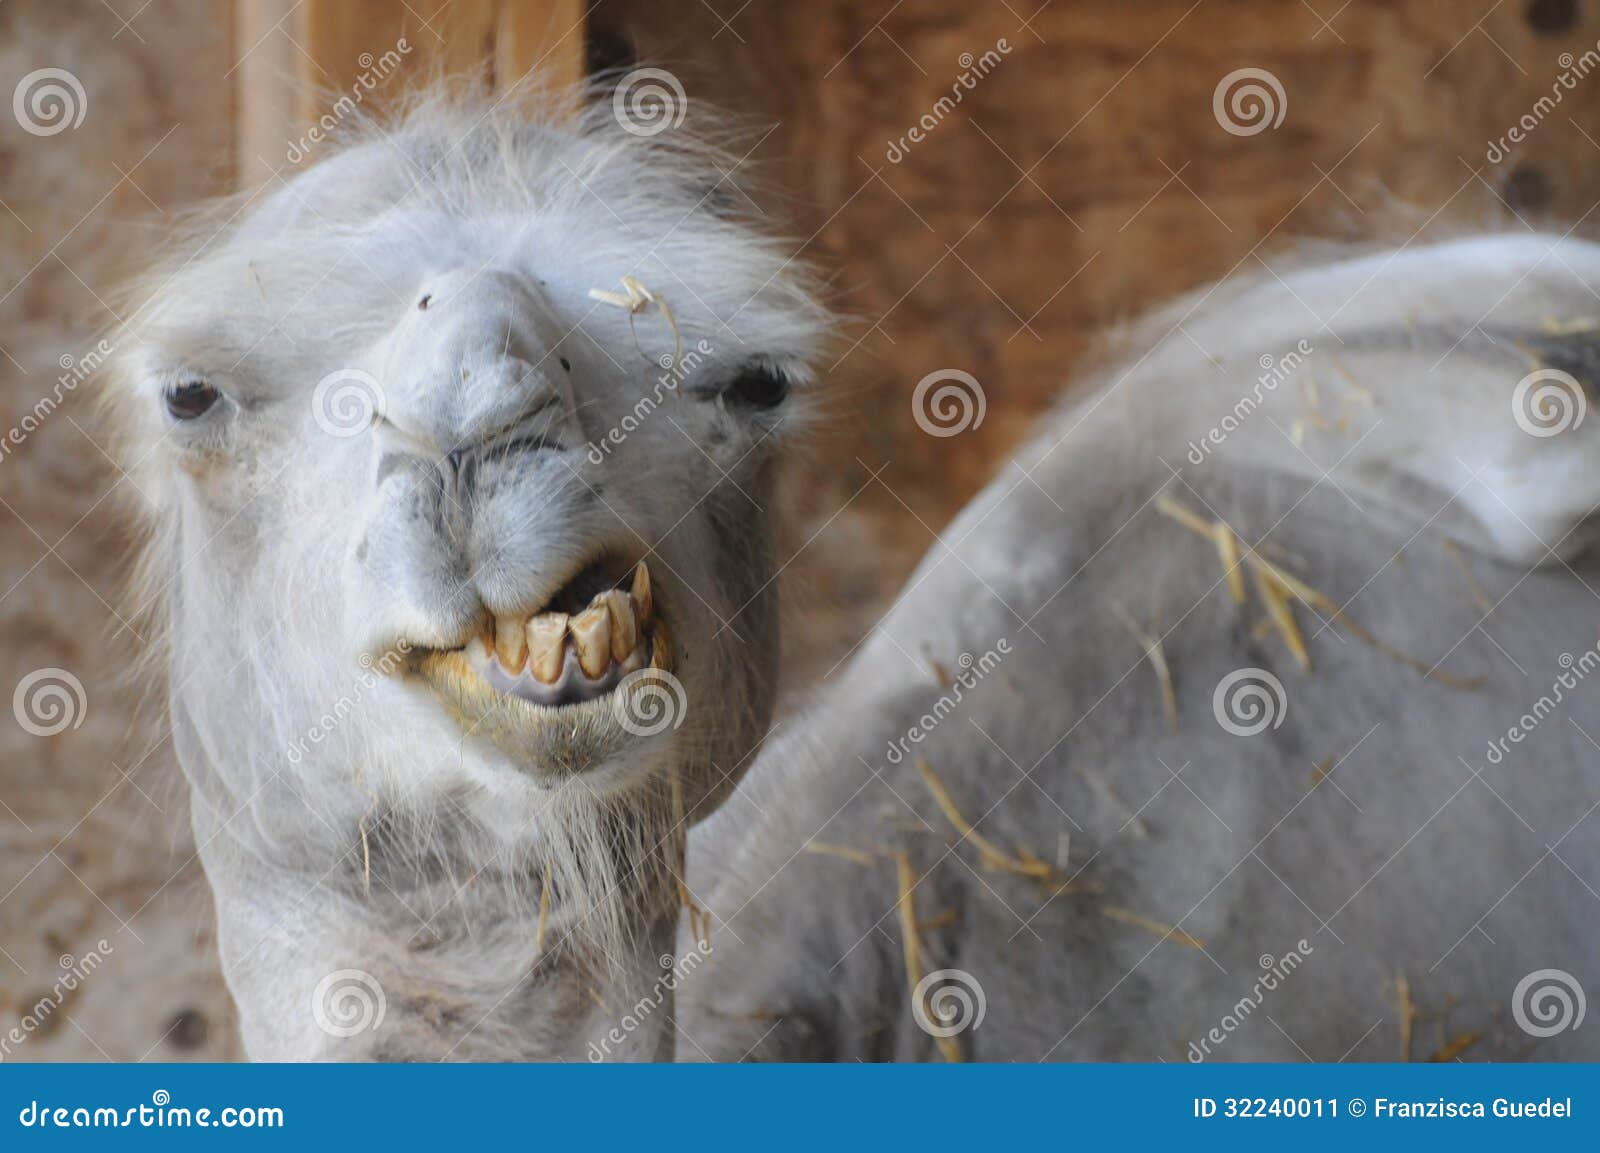 Funny Camel with Bad Teeth stock image. Image of closeup - 32240011